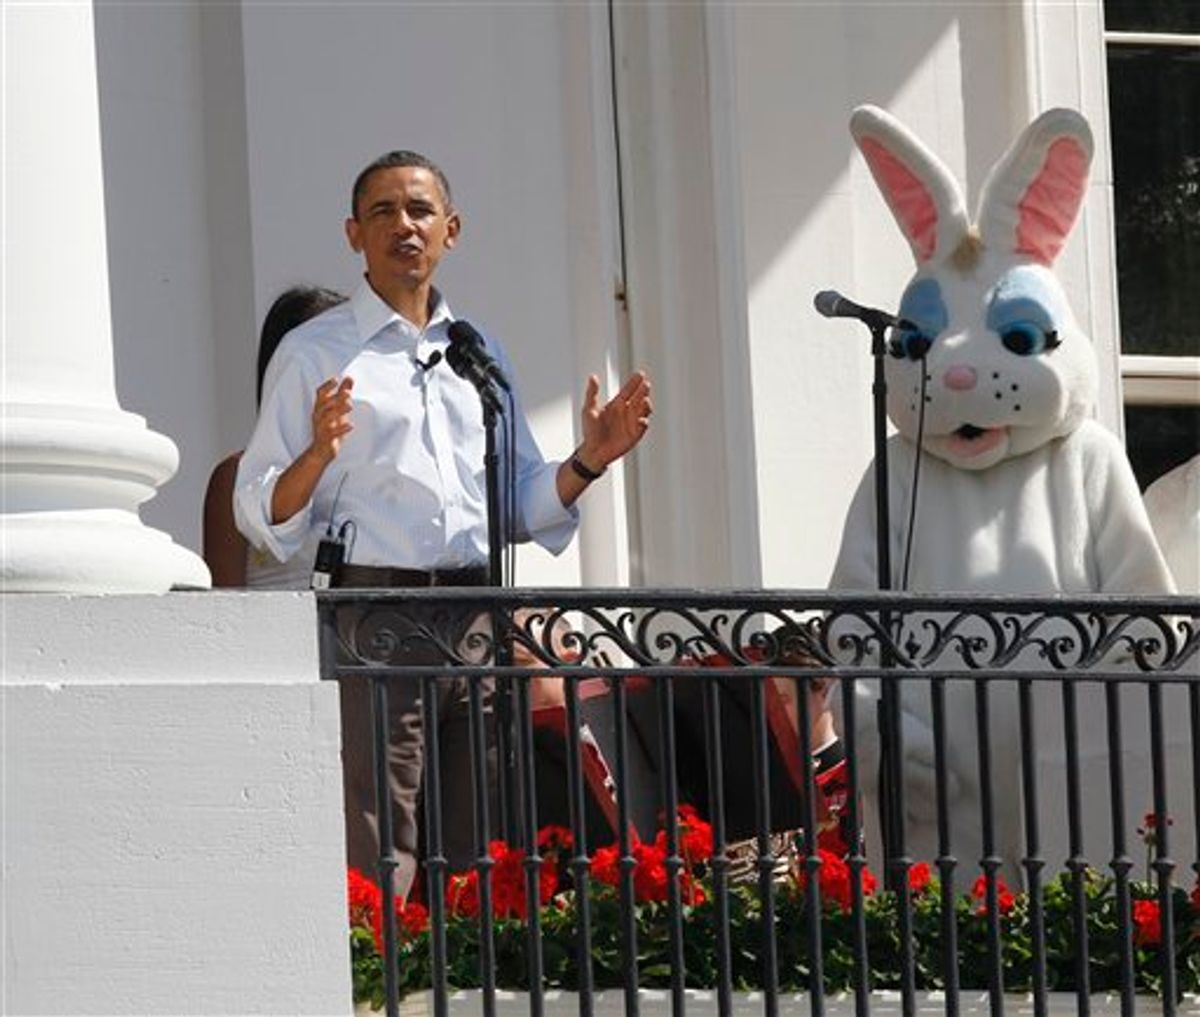 President Barack Obama stands with the Easter Bunny during the White House Easter Egg Roll, Monday, April 25, 2011, on the South Lawn of the White House in Washington. (AP Photo/Charles Dharapak) (AP)